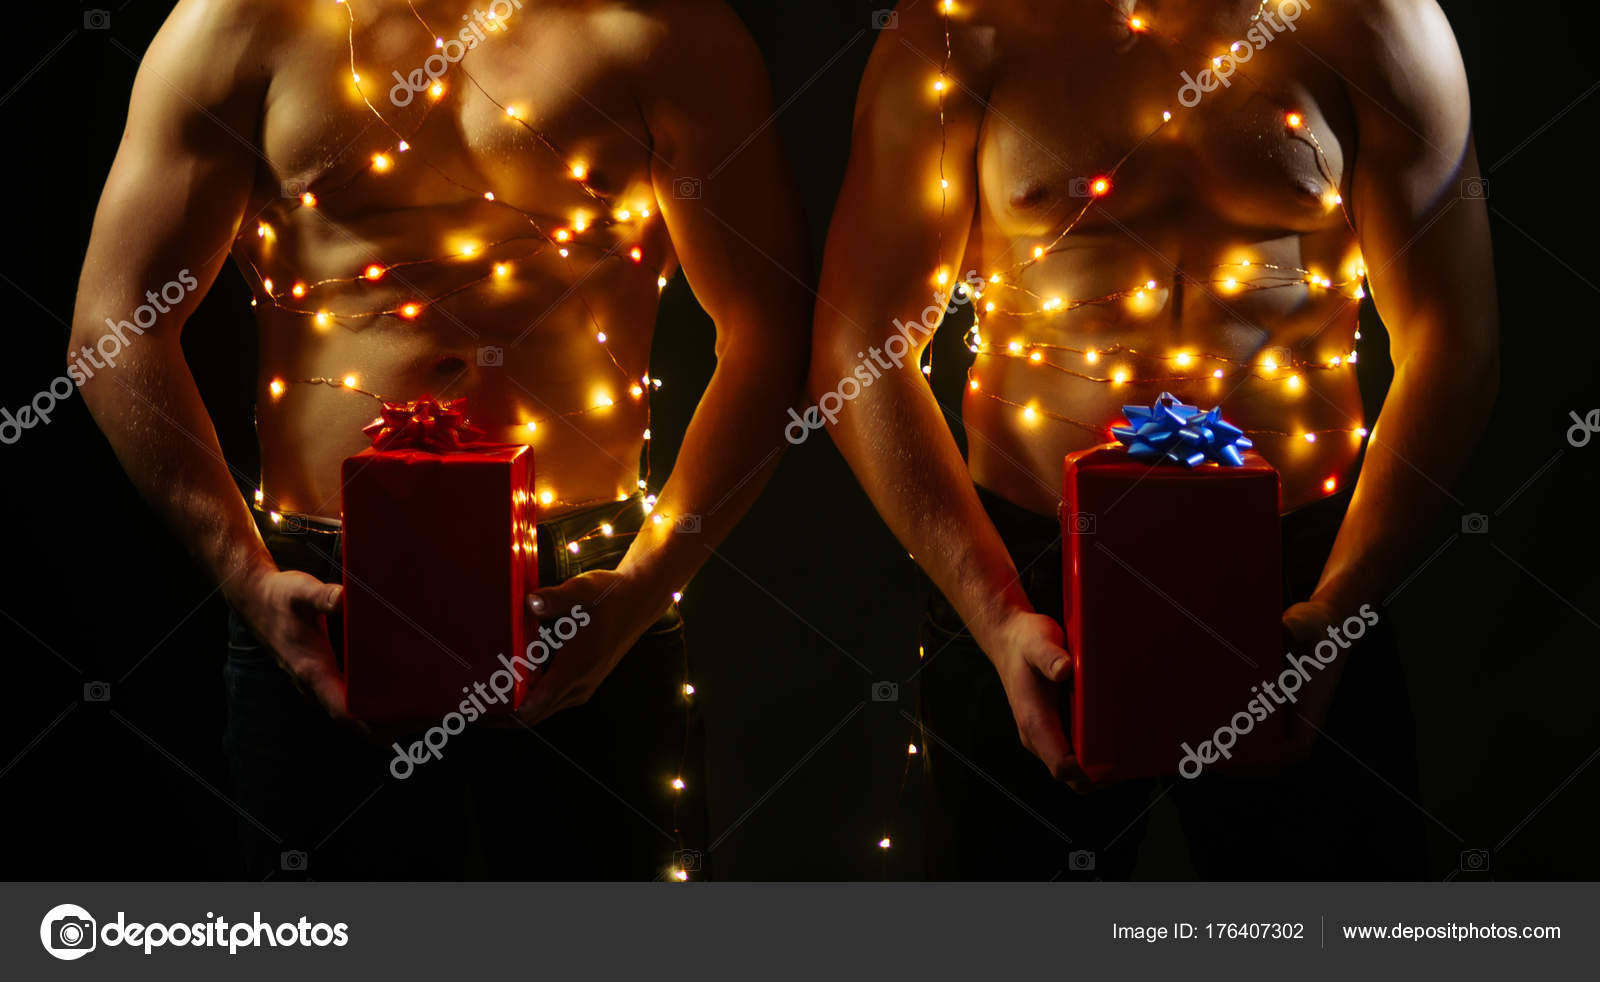 Christmas party and sex games